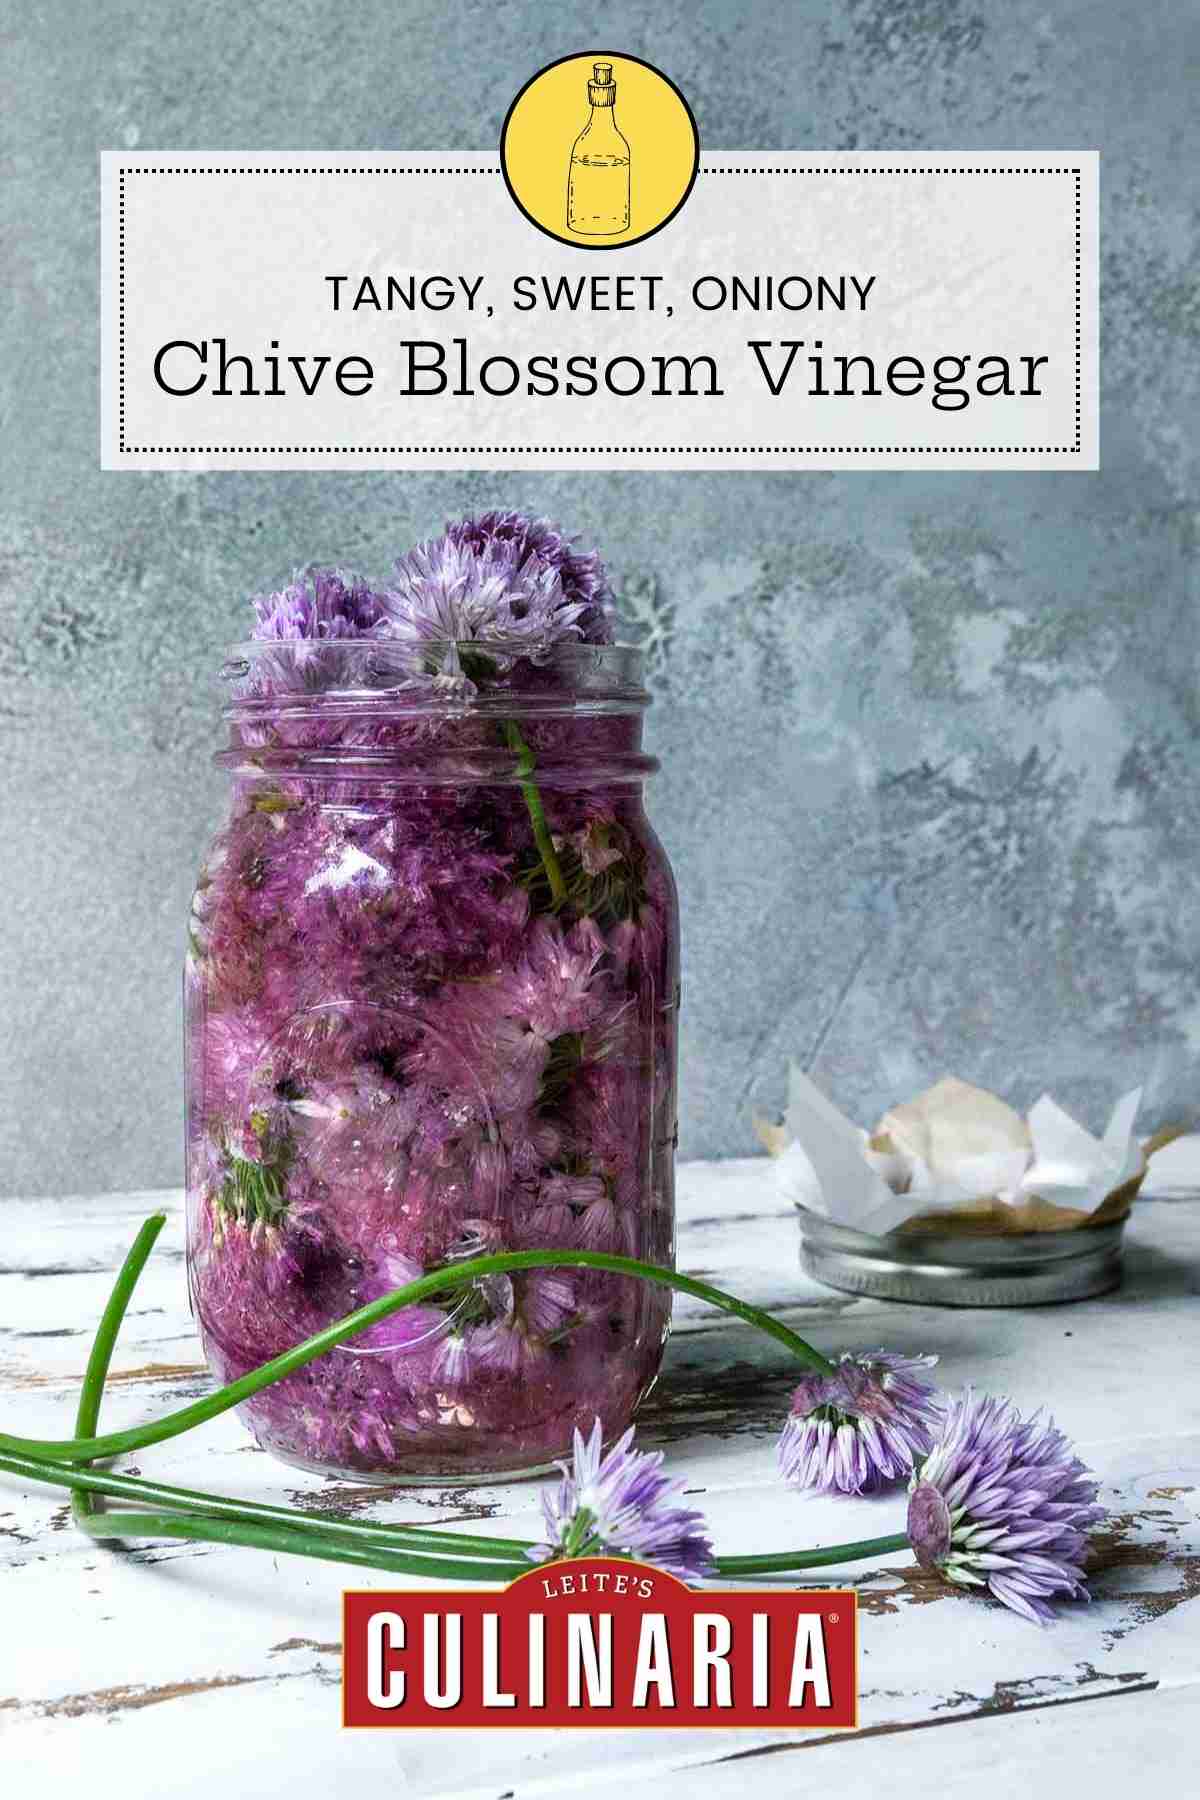 A Ball jar filled with chive blossom vinegar and the blossoms.